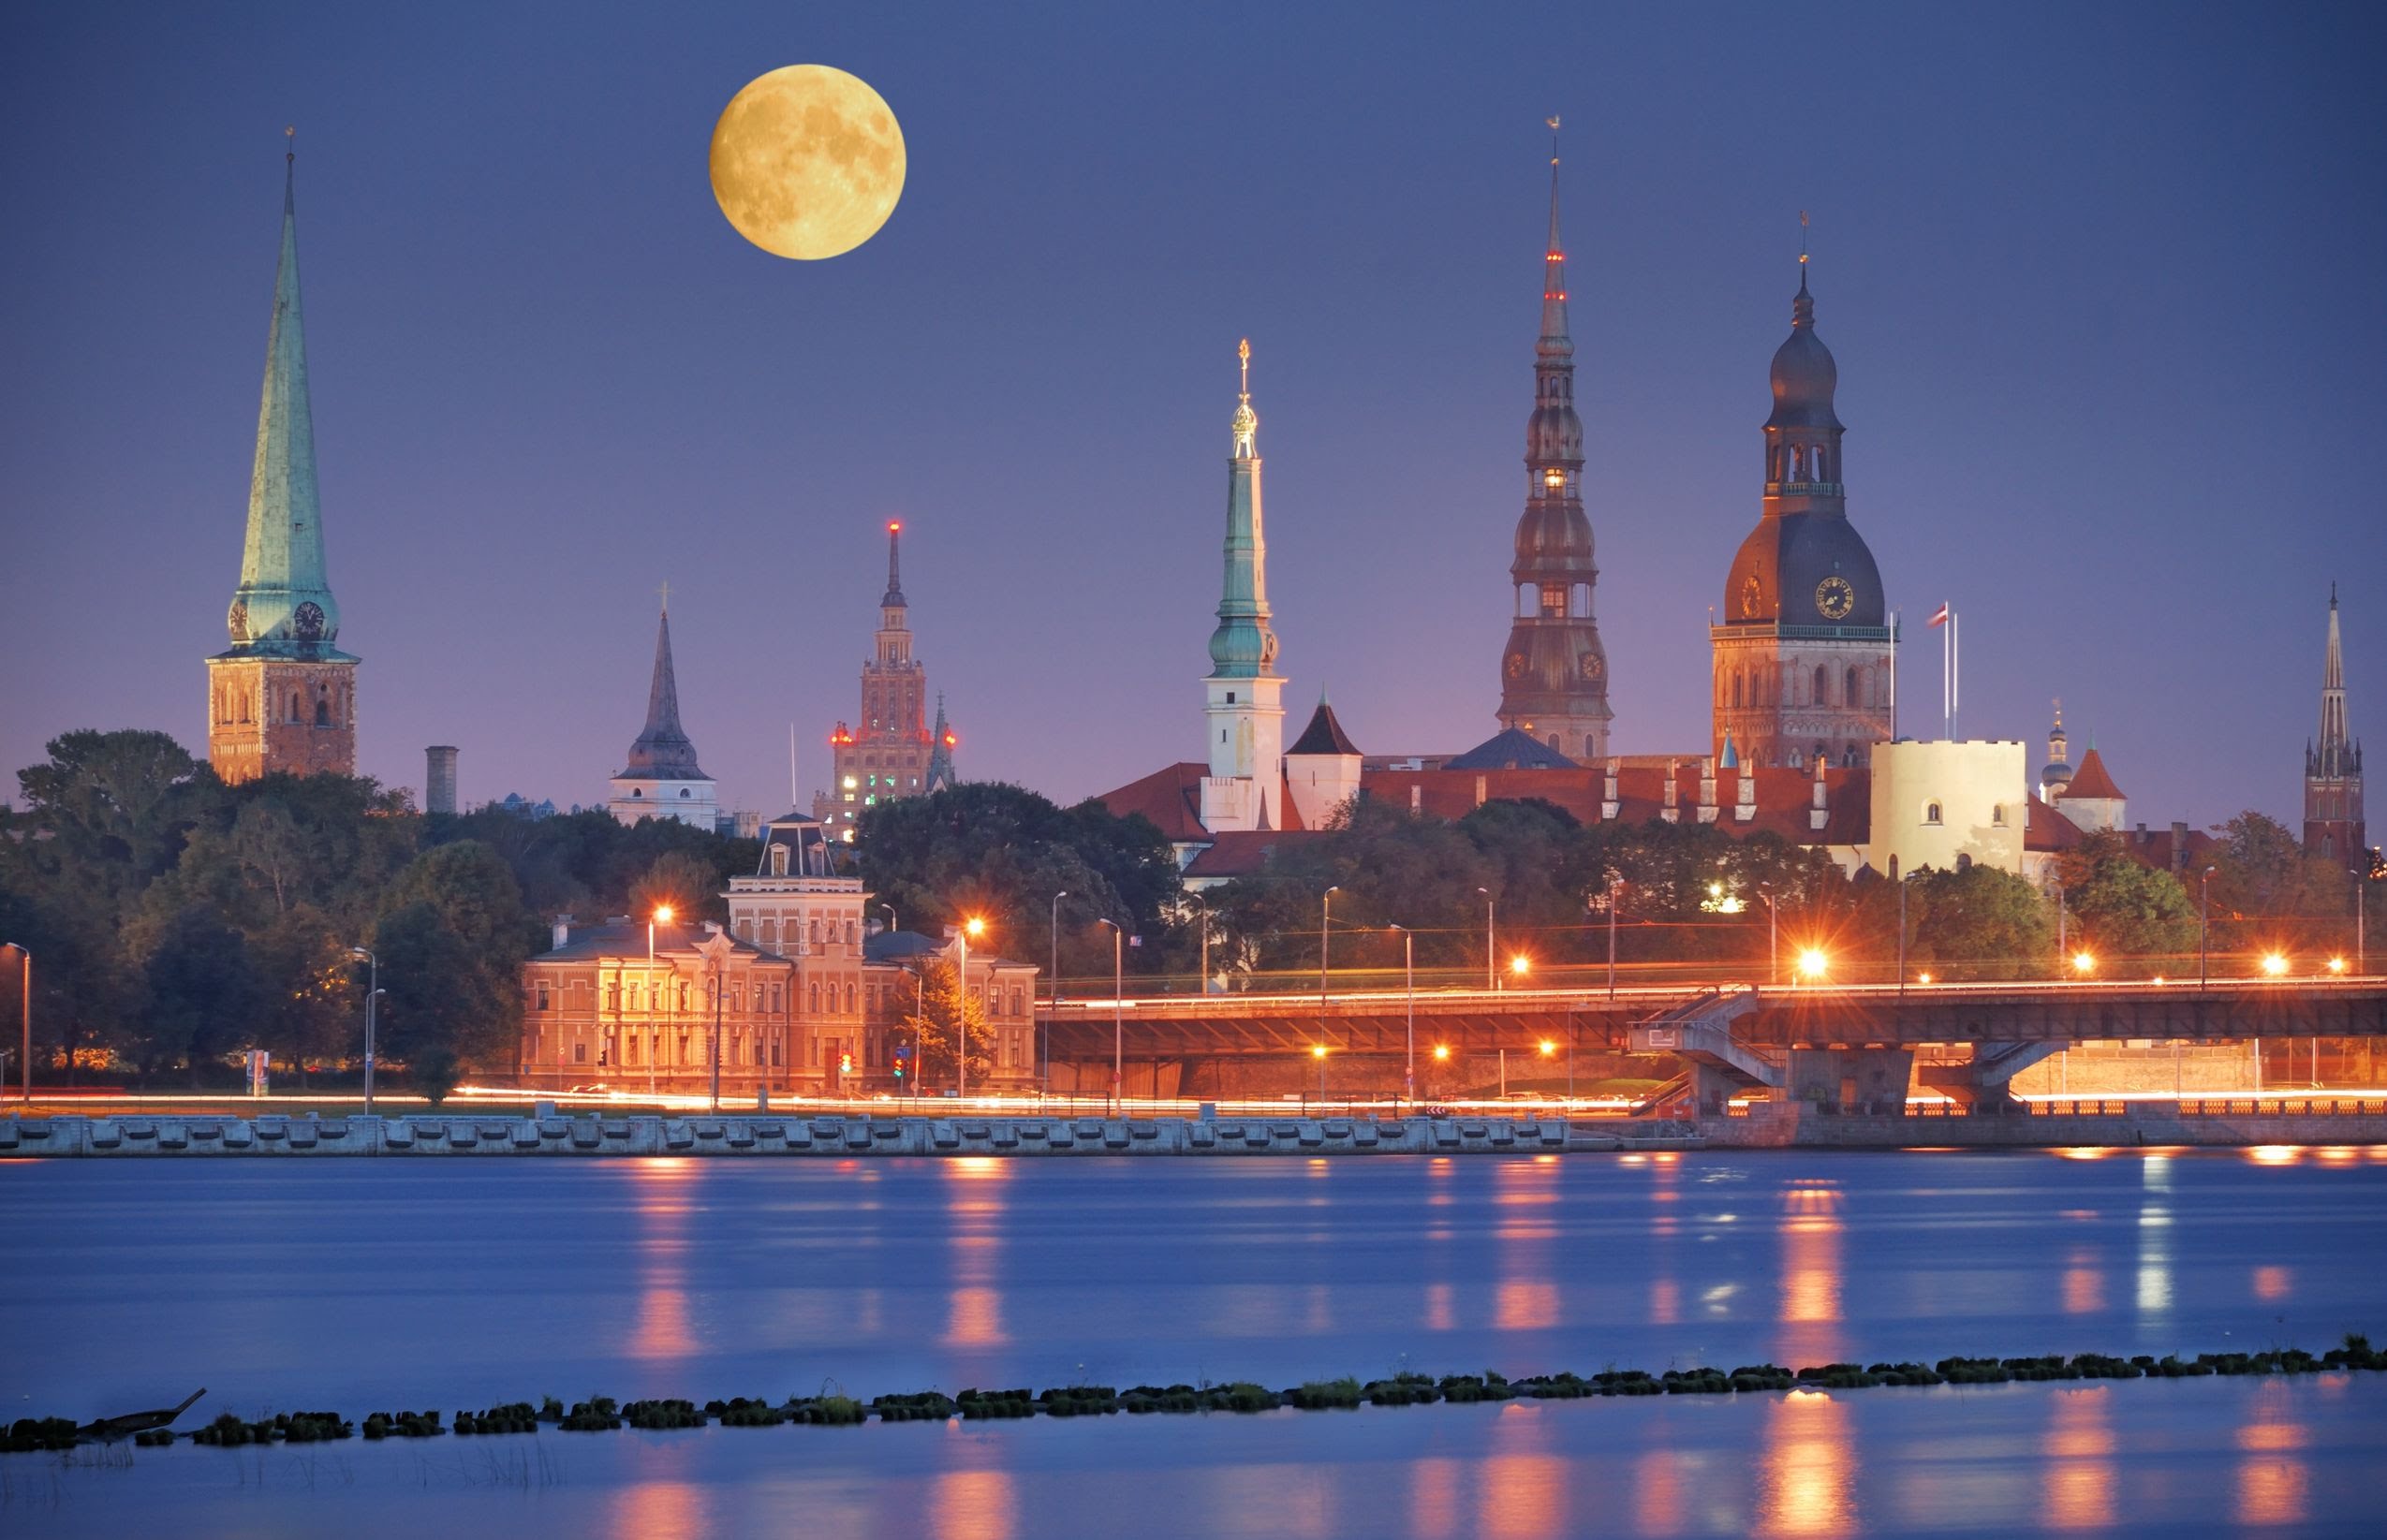 Riga wallpapers, Man Made, HQ Riga pictures | 4K Wallpapers 2019